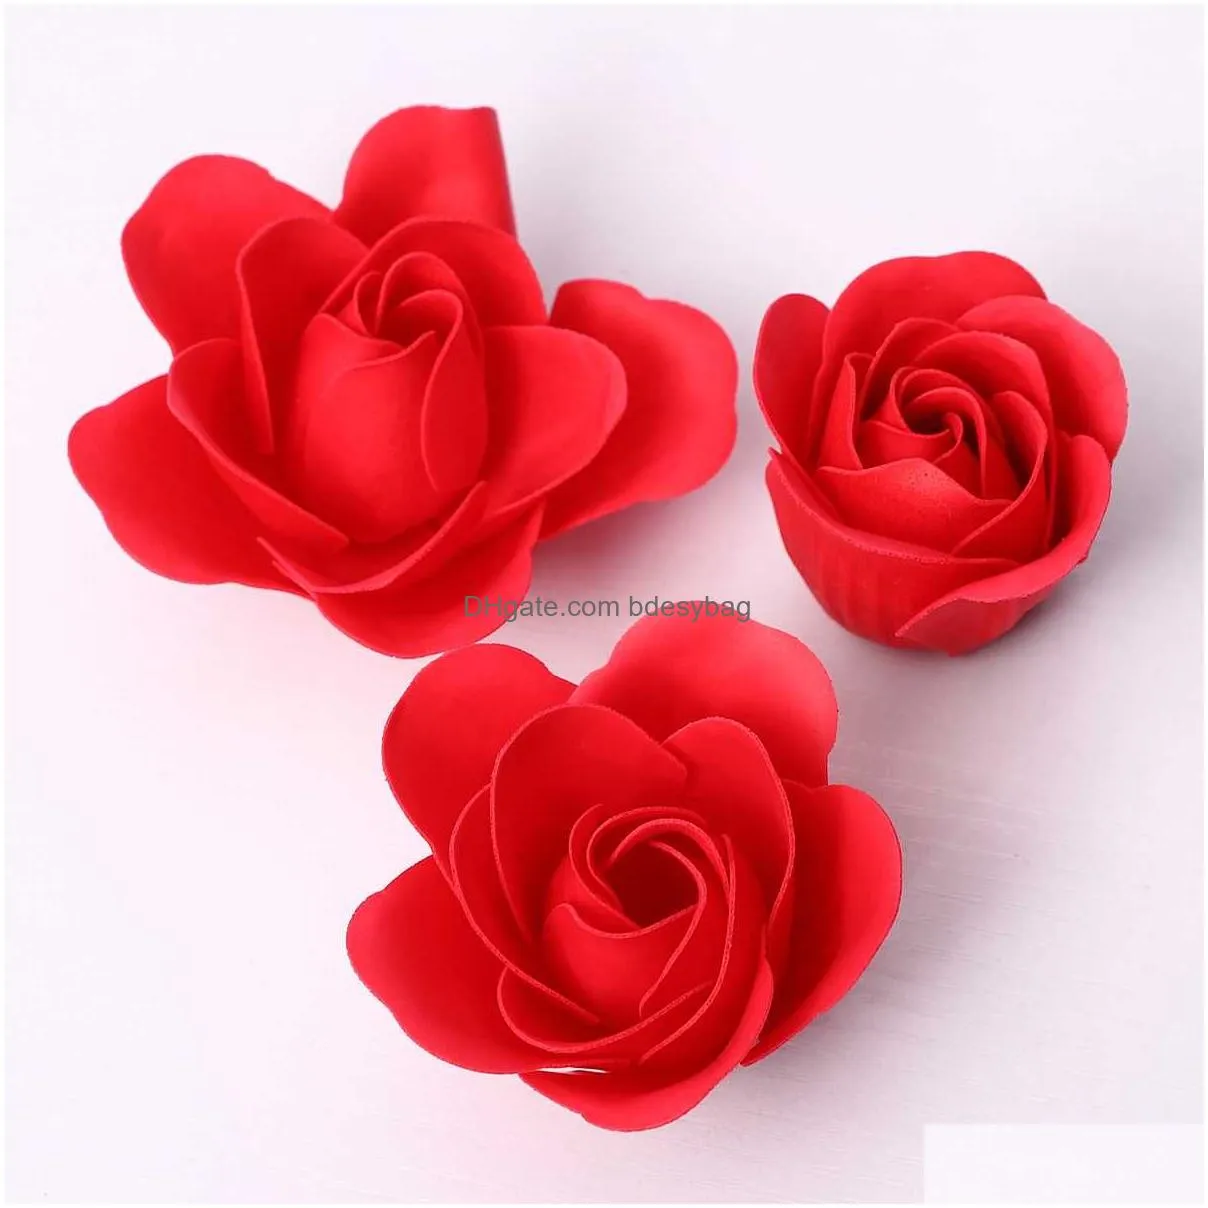 Decorative Flowers & Wreaths Wholesale 81Pcs/Box Handmade Rose Soap Artificial Dried Flowers Mothers Day Wedding Valentines Christmas Dh0Qc